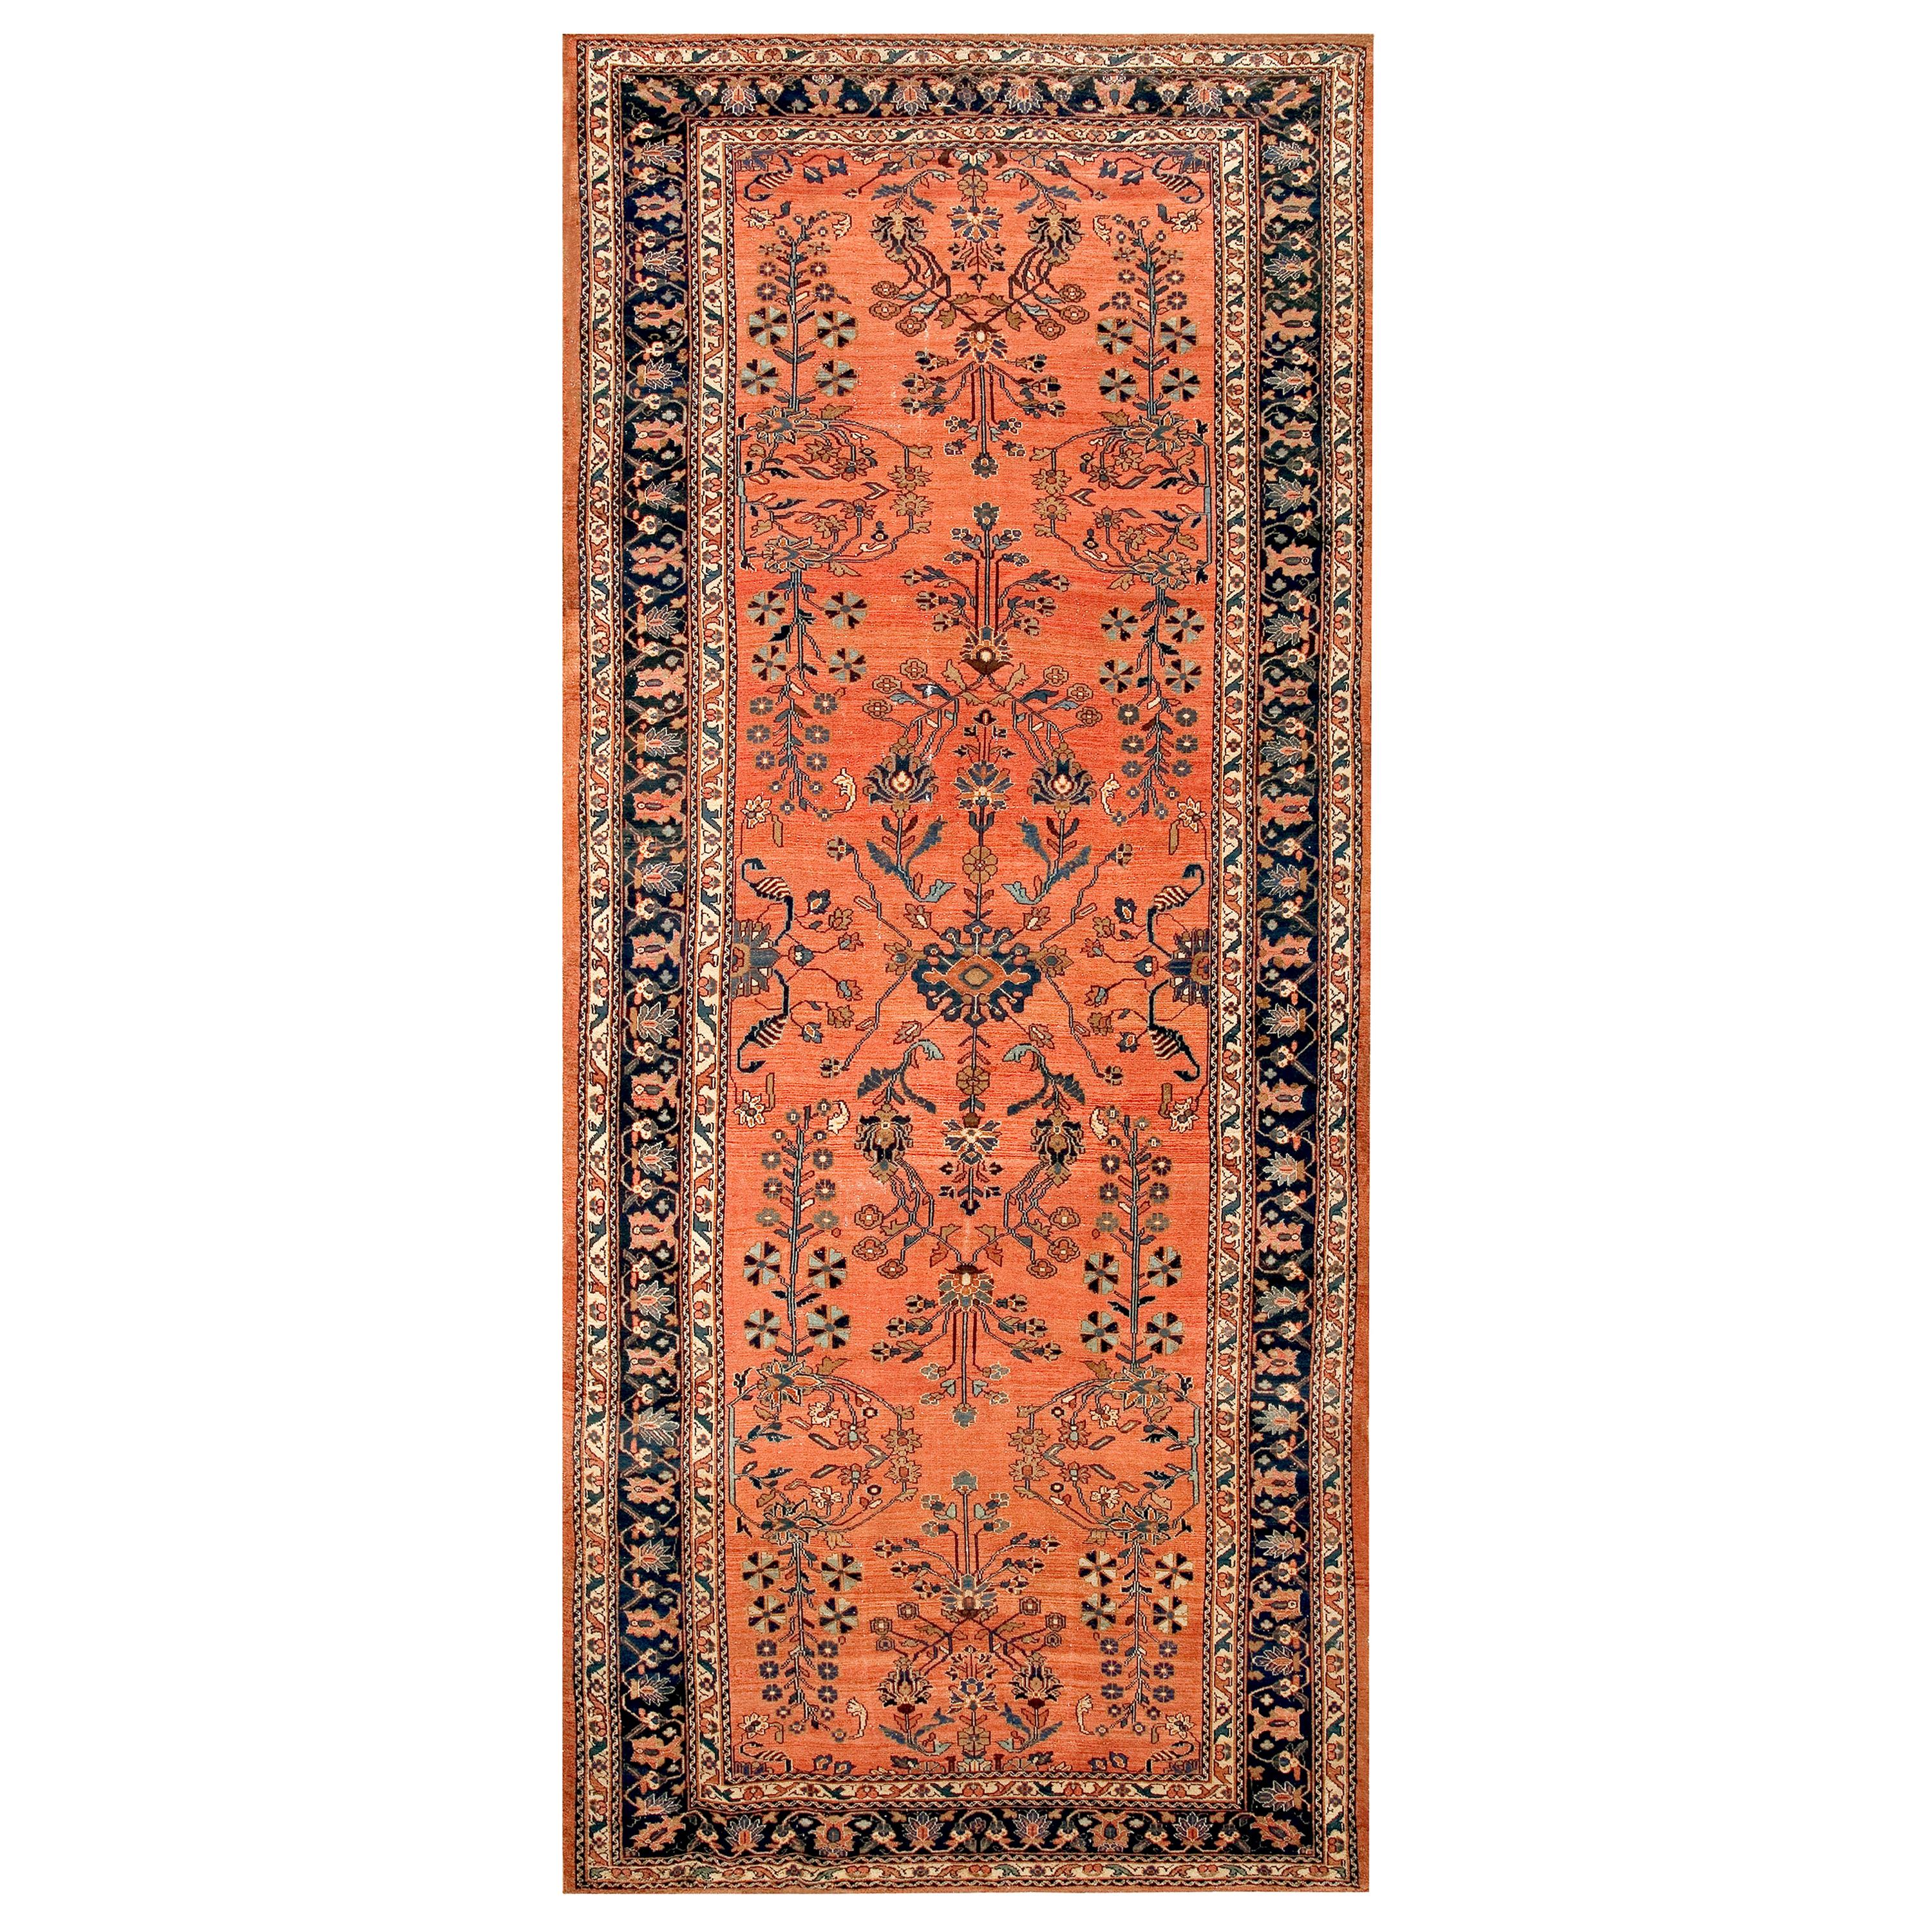 1920s Persian Malayer Carpet ( 7'2" x 16'6" - 218 x 513 )  For Sale